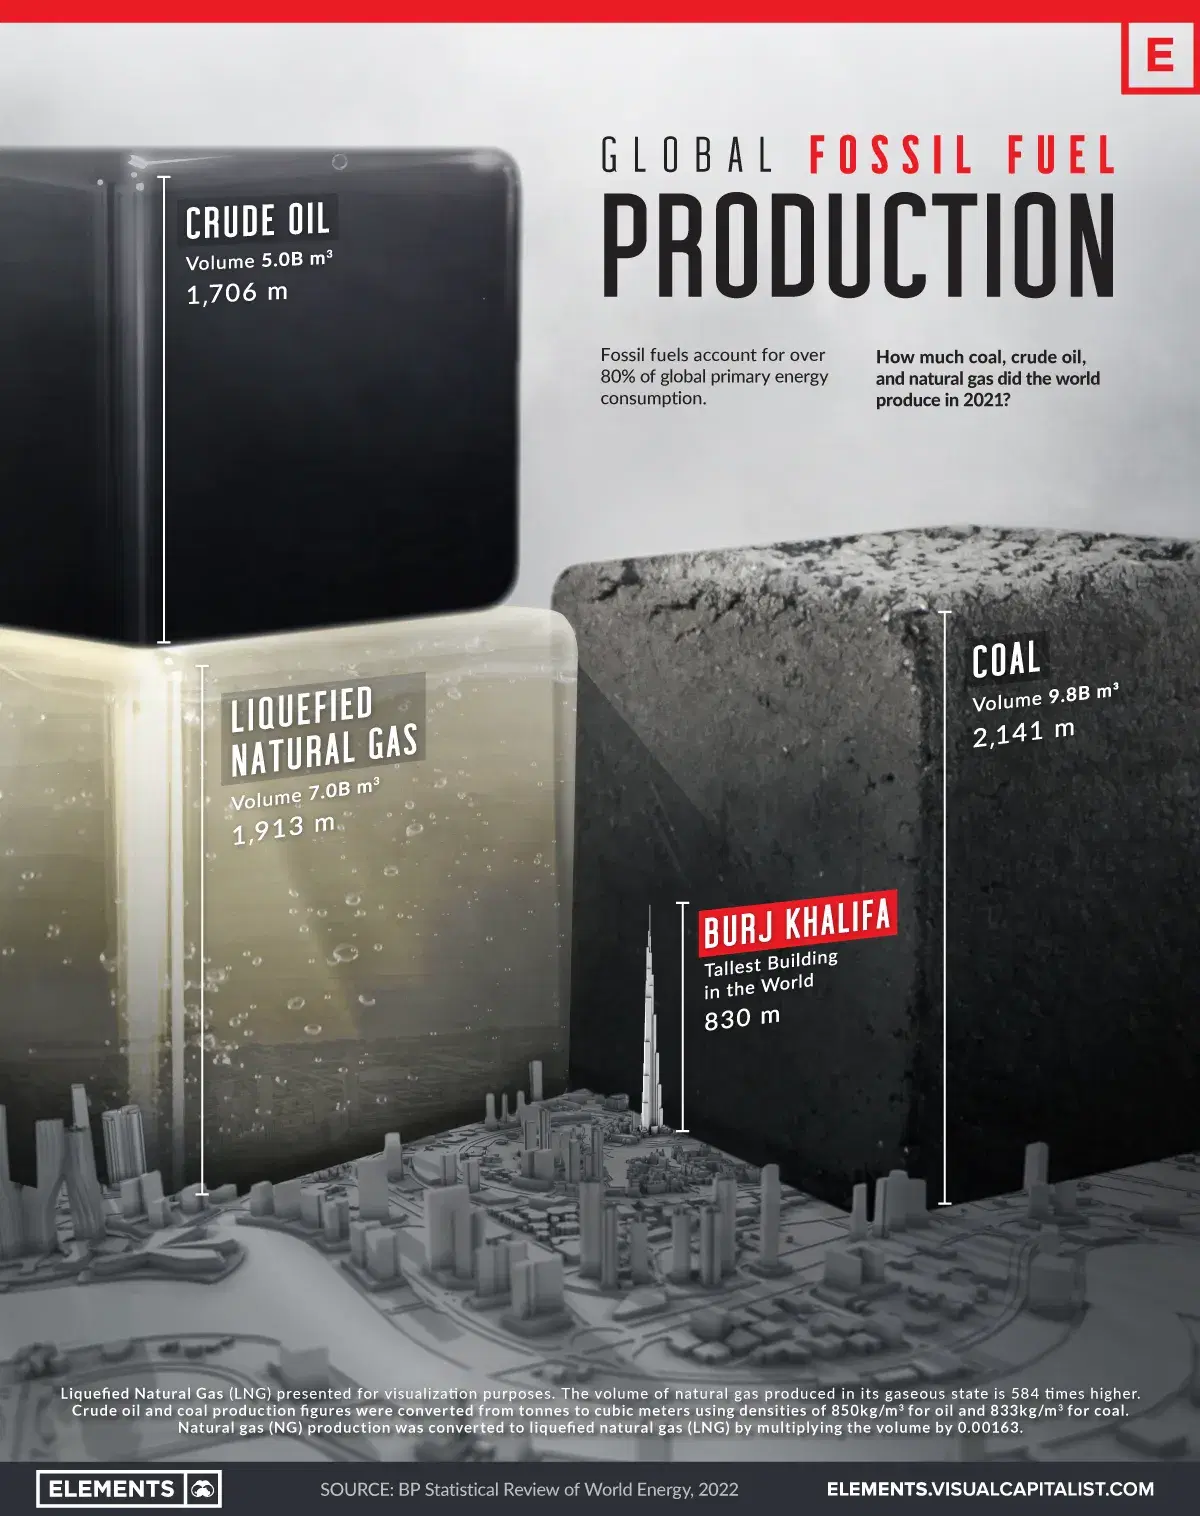 Visualizing the Scale of Global Fossil Fuel Production